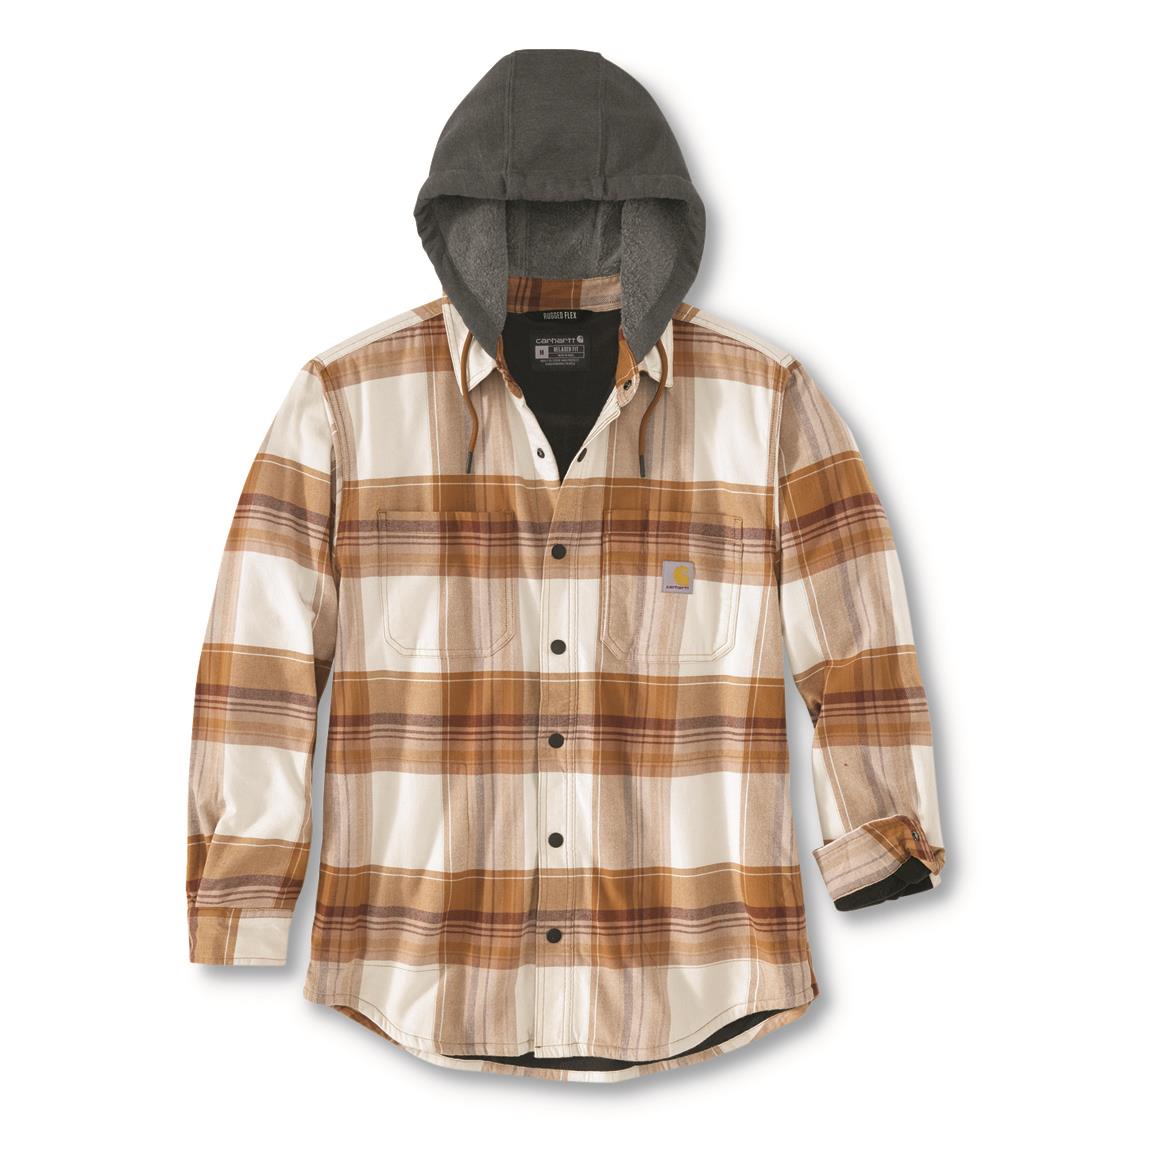 DKOTA GRIZZLY Men's Ryker Flannel-lined Shirt Jacket - 728008, Shirts ...